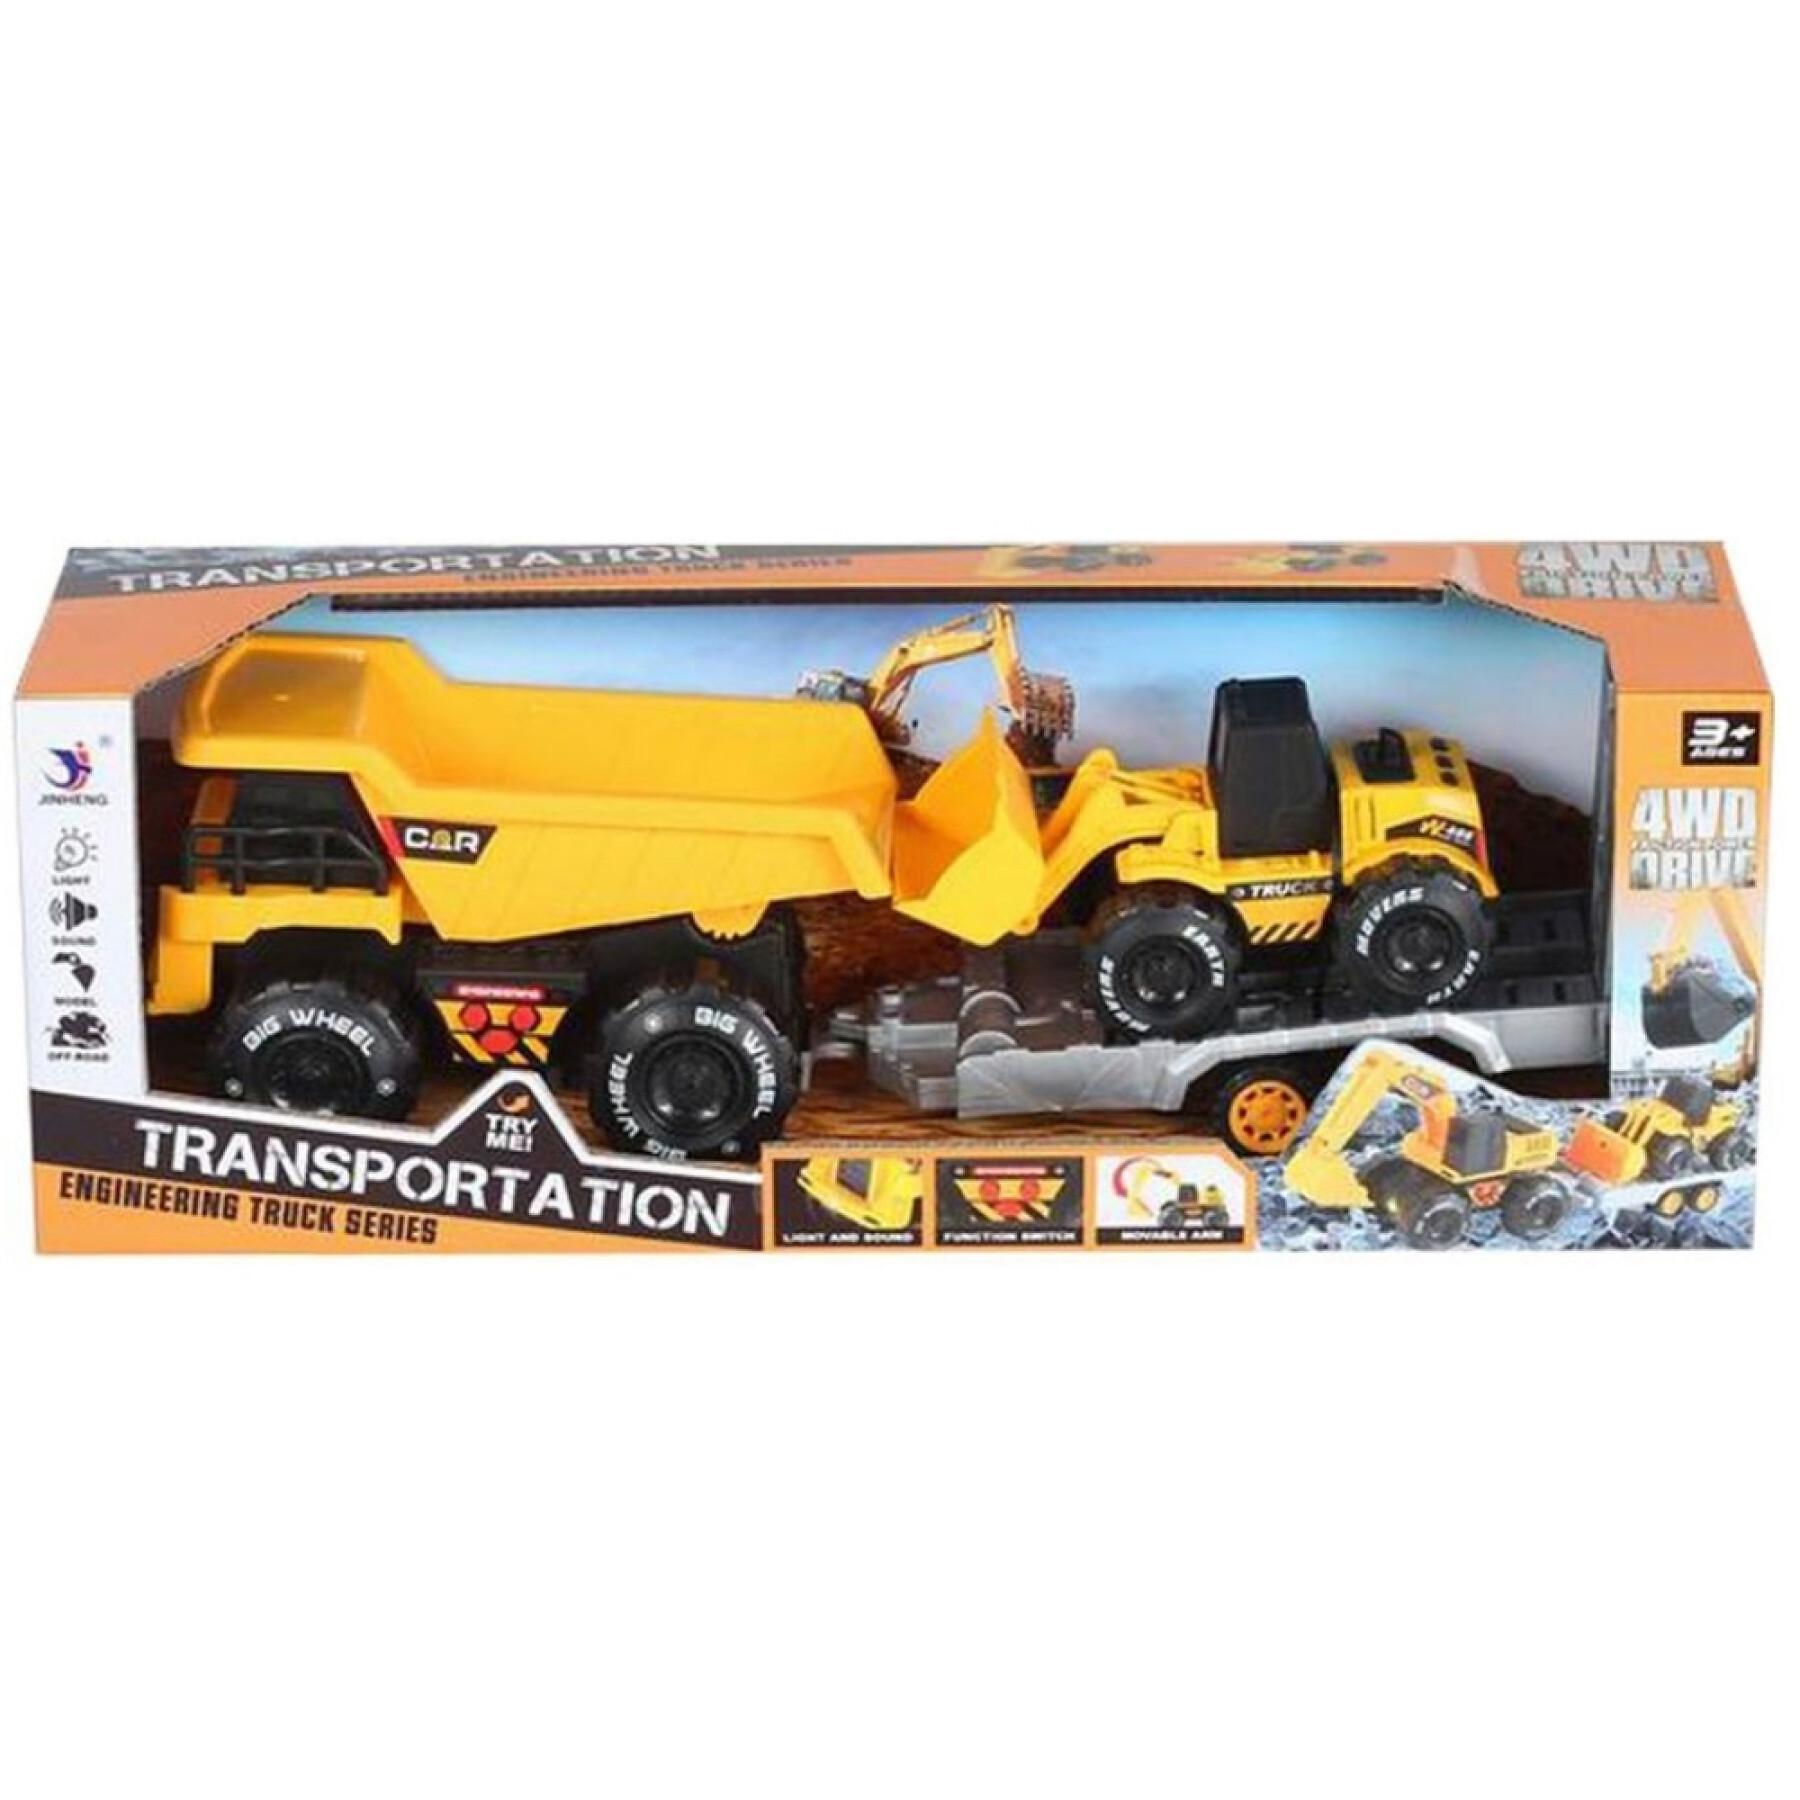 Friction truck with trailer 2 assorted models Fantastiko